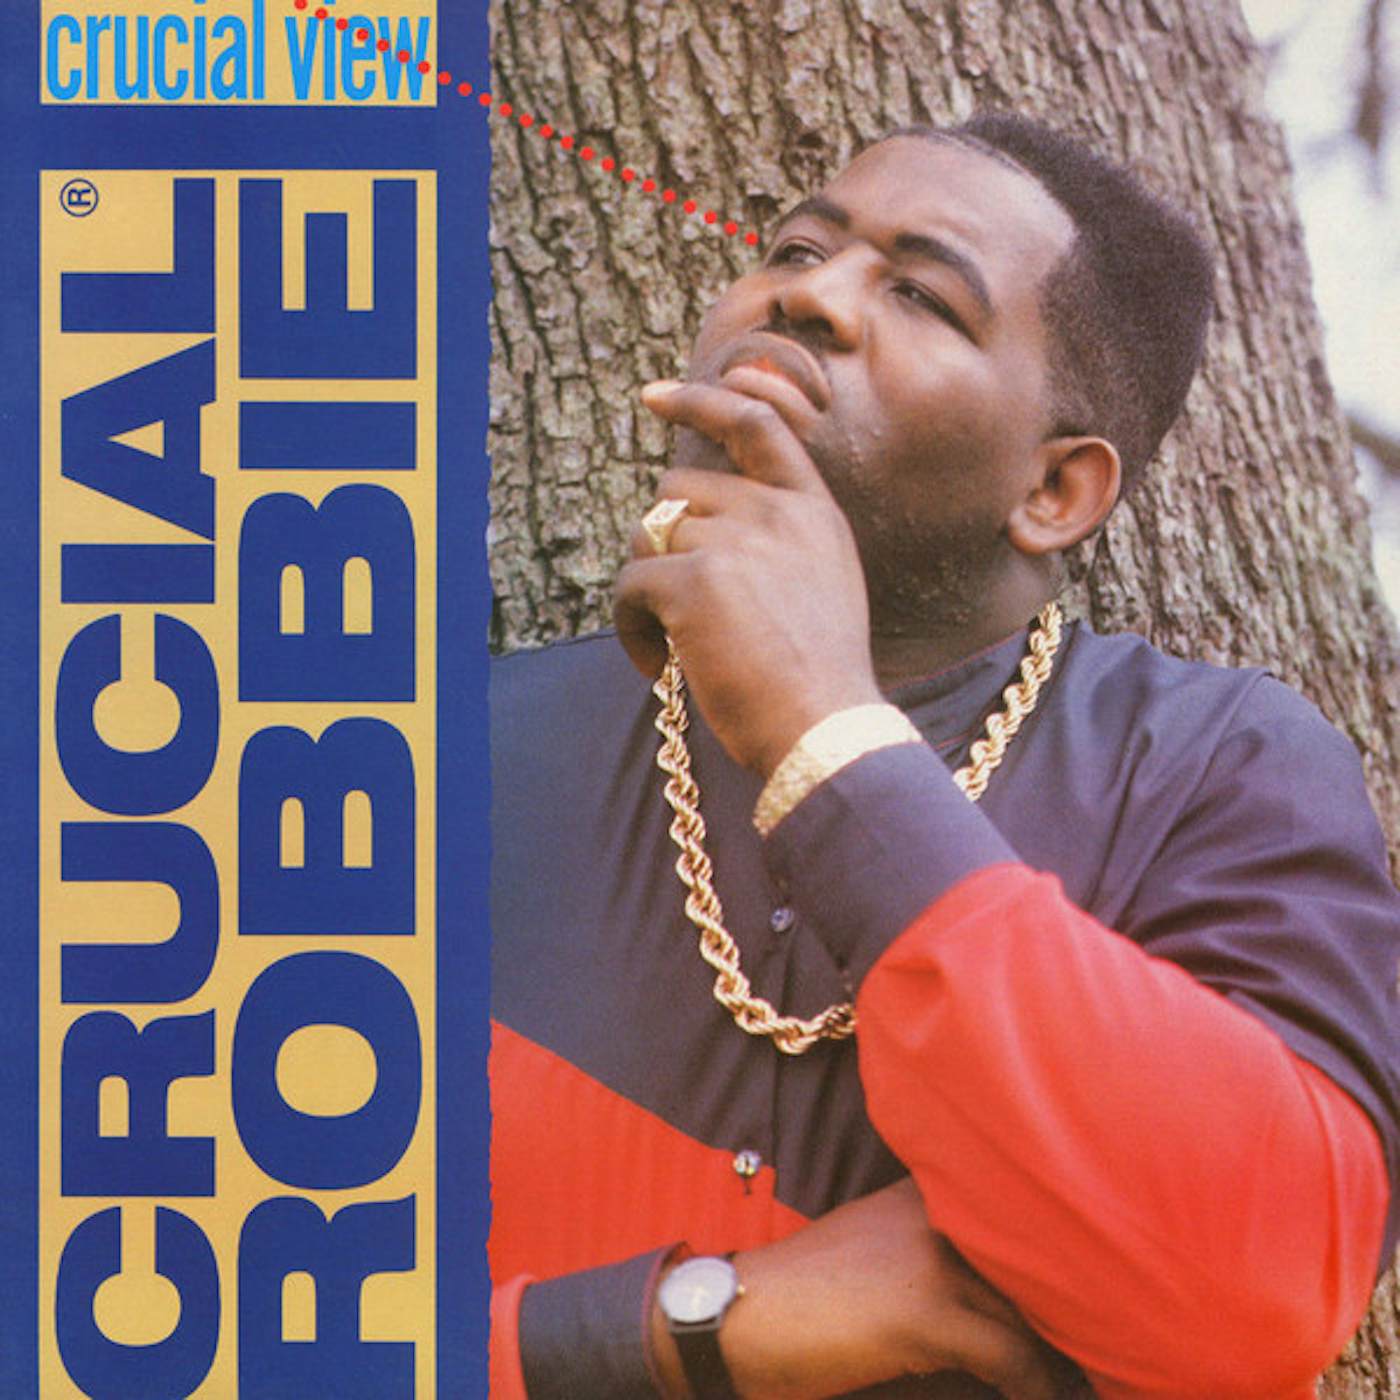 Crucial Robbie Crucial View Vinyl Record